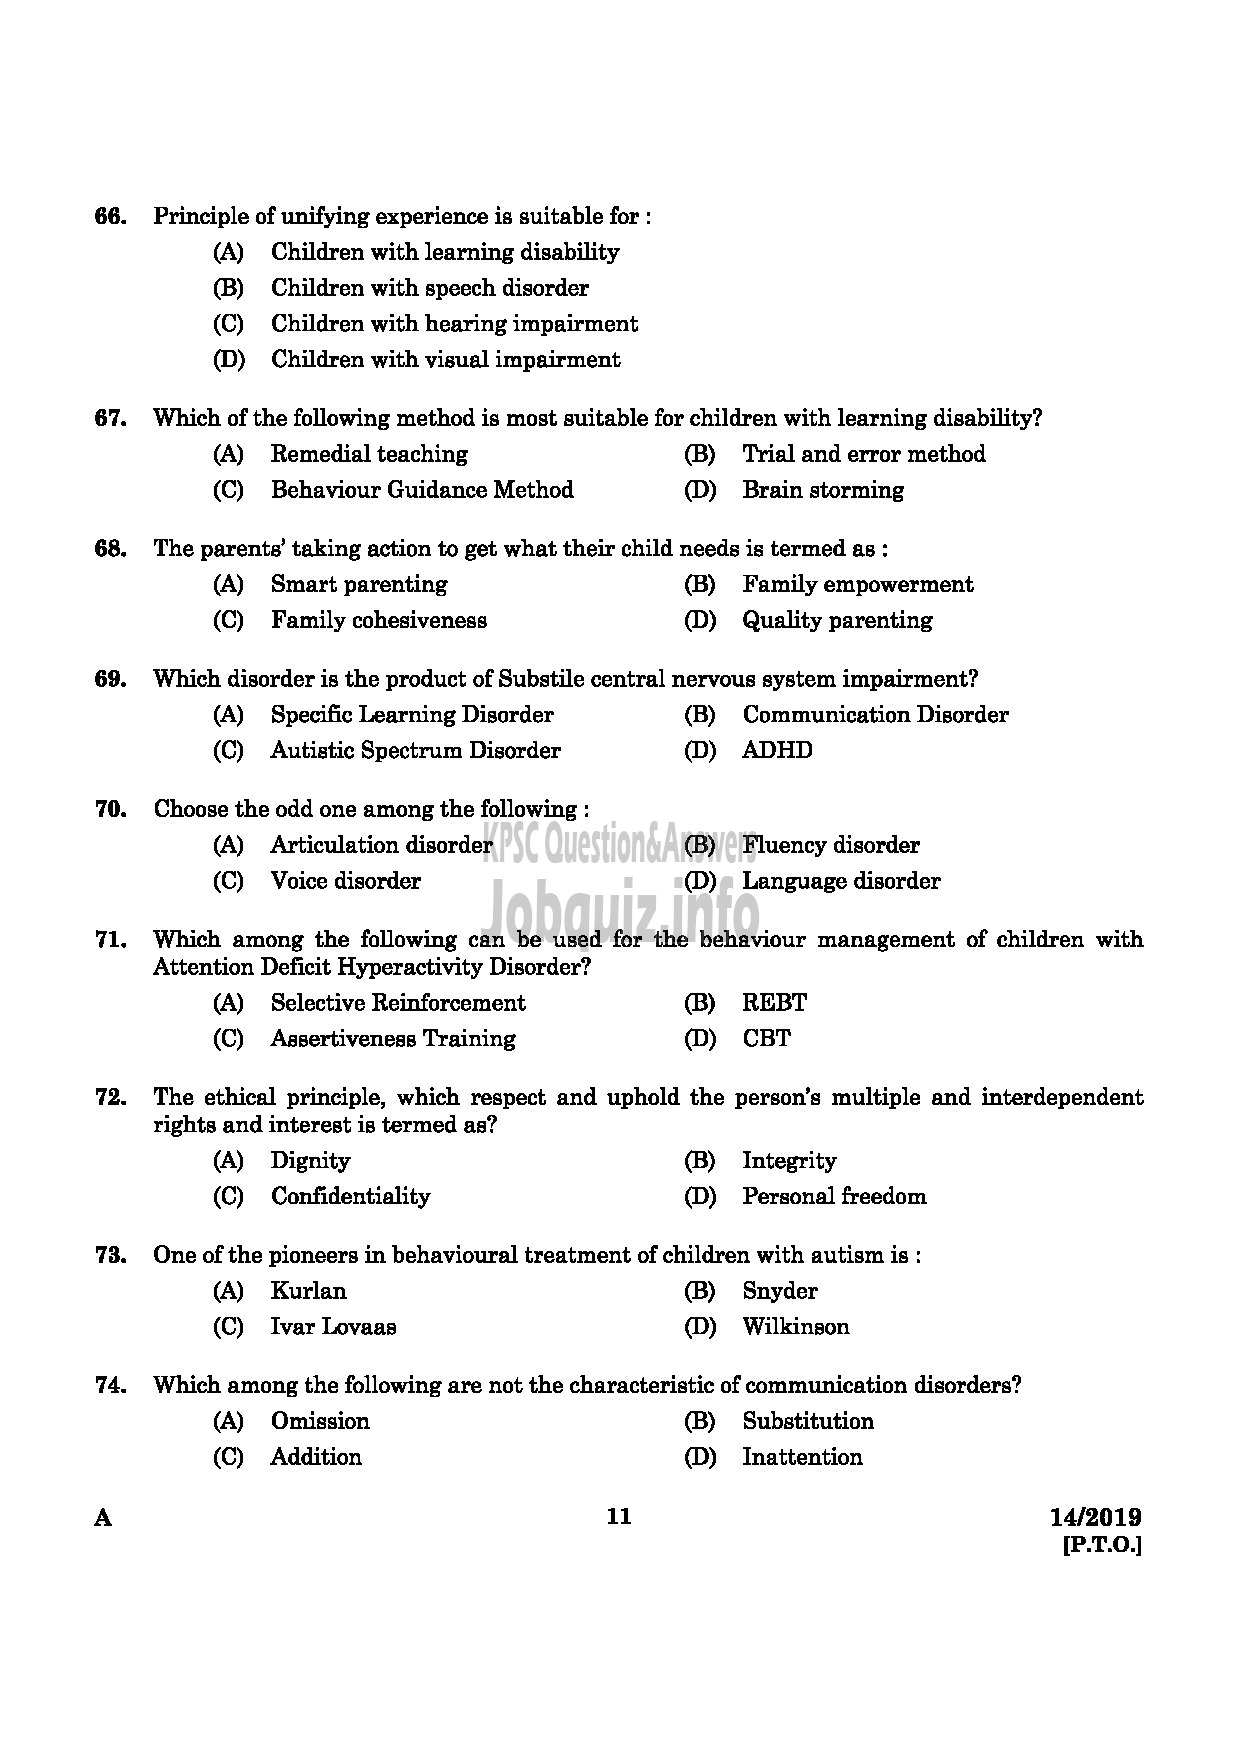 Kerala PSC Question Paper - SPECIAL TEACHER HOME FOR MENTALLY DEFICIENT CHILDREN SOCIAL JUSTICE DEPARTMENT-9